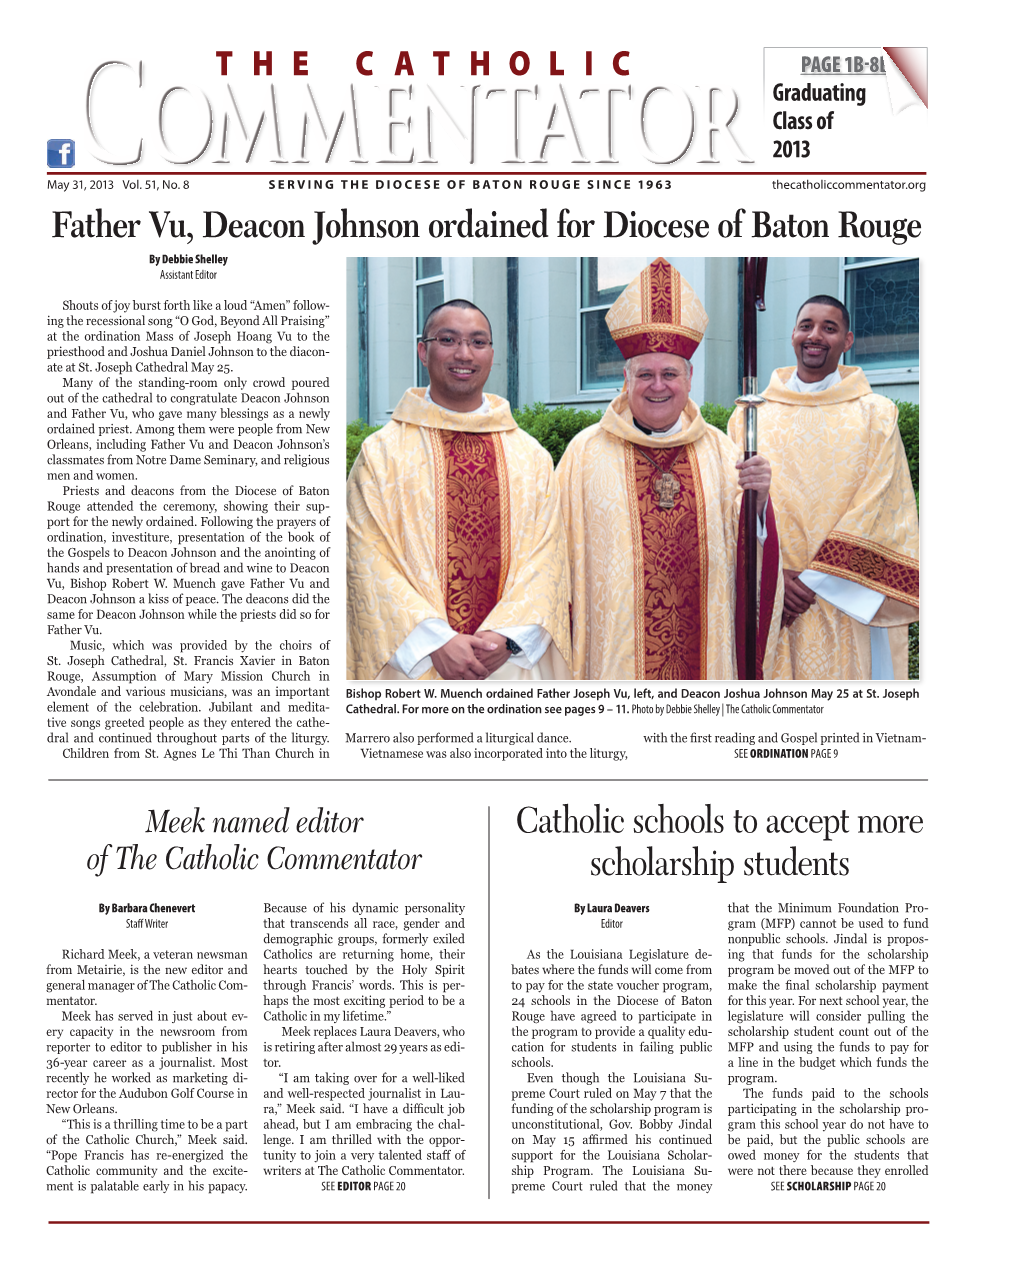 Father Vu, Deacon Johnson Ordained for Diocese of Baton Rouge by Debbie Shelley Assistant Editor